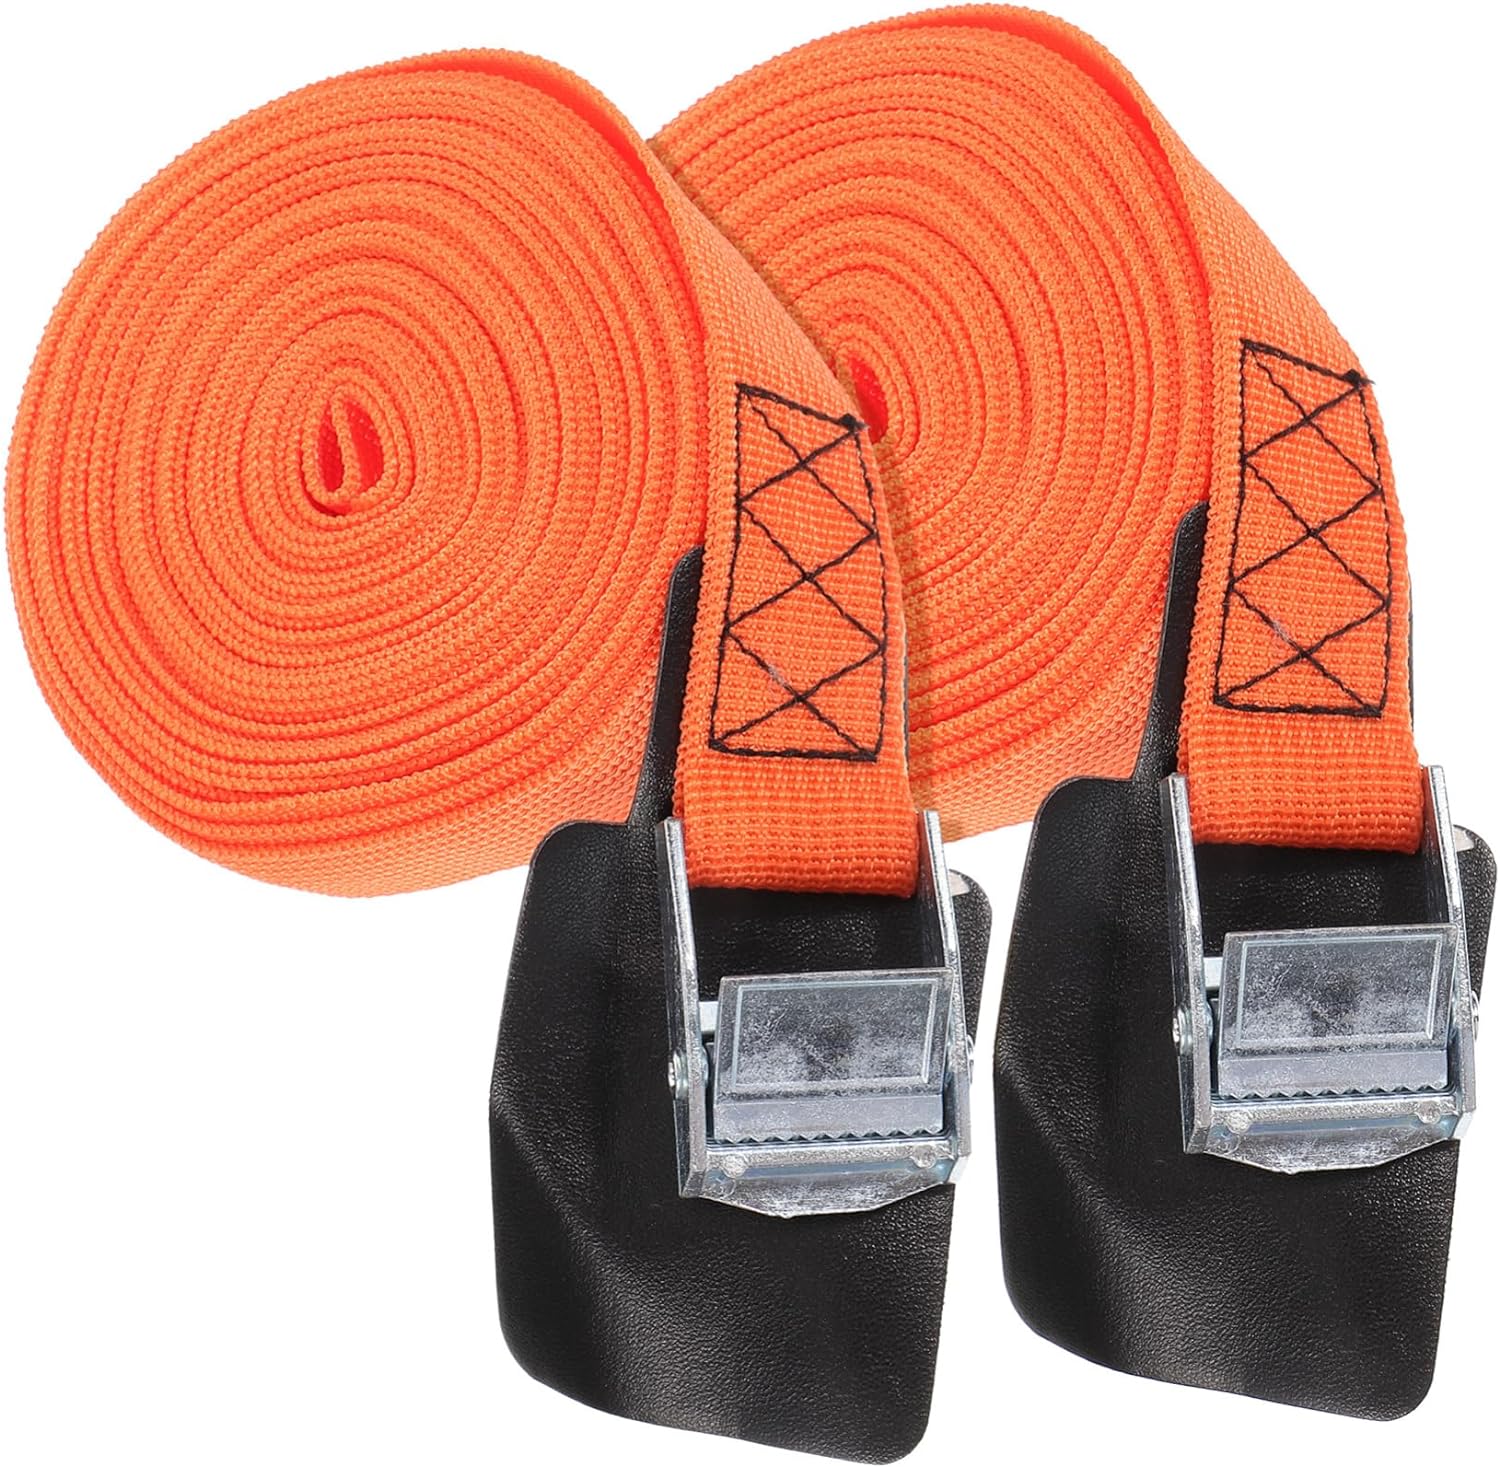 FIGT-Down Rolls Motorcycle Straps and Tie Down Car Tie Down Straps ...